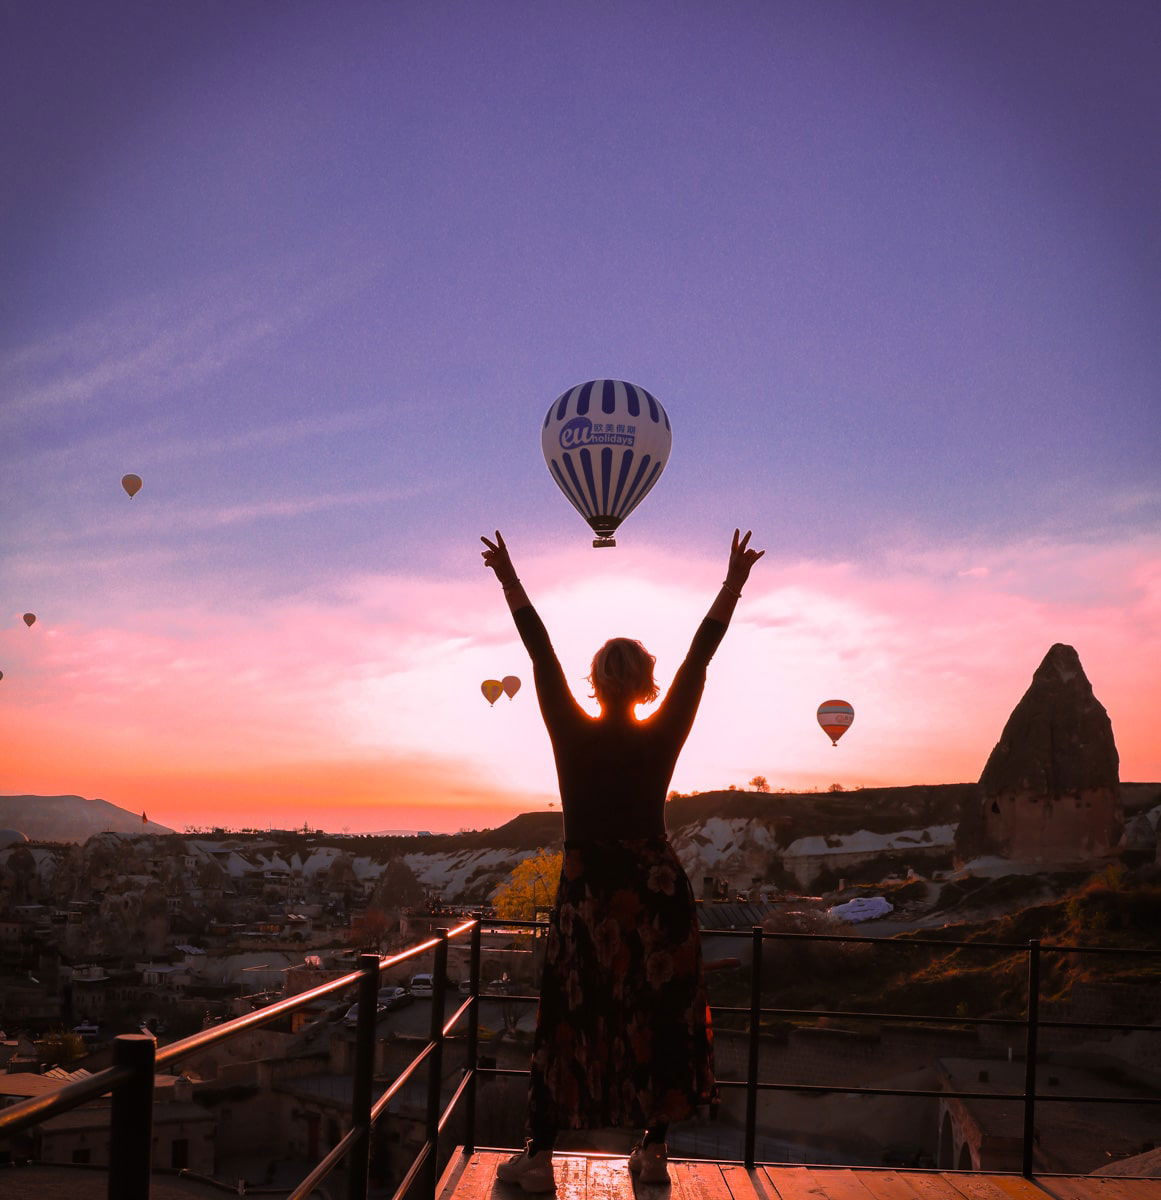 SJ raises her arms towards a sky dotted with hot air balloons at sunset, standing on a balcony overlooking the rocky landscape of Cappadocia.